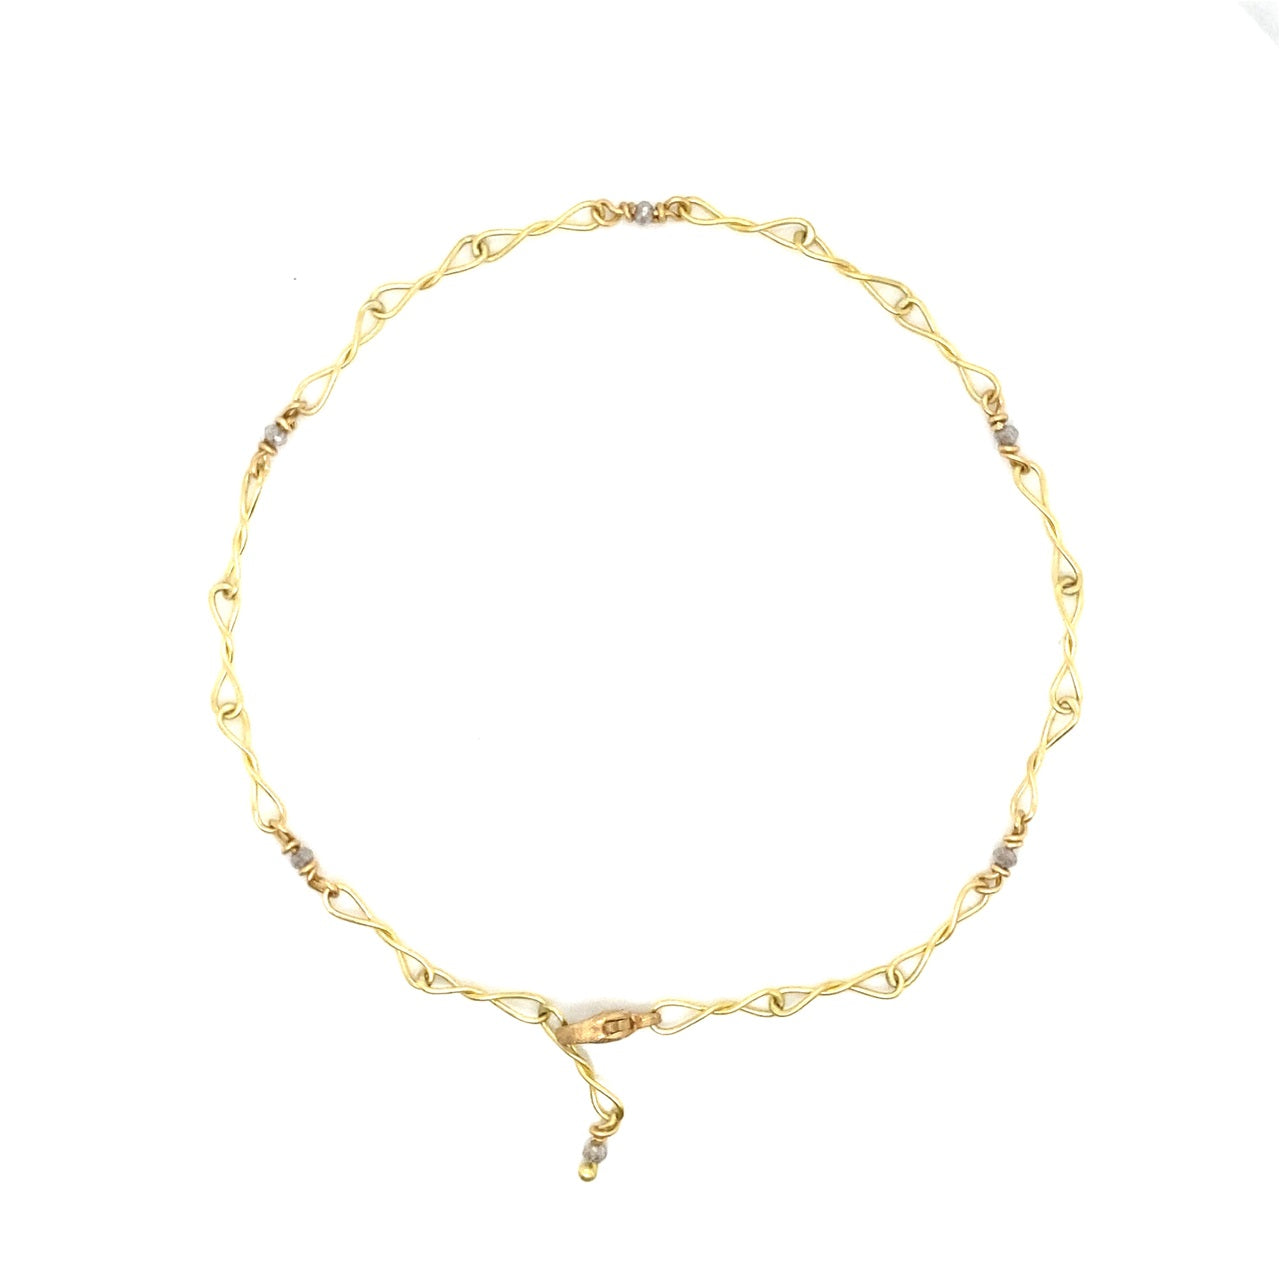 18K Gold Twisted Popsicle Bracelet with Diamond Beads